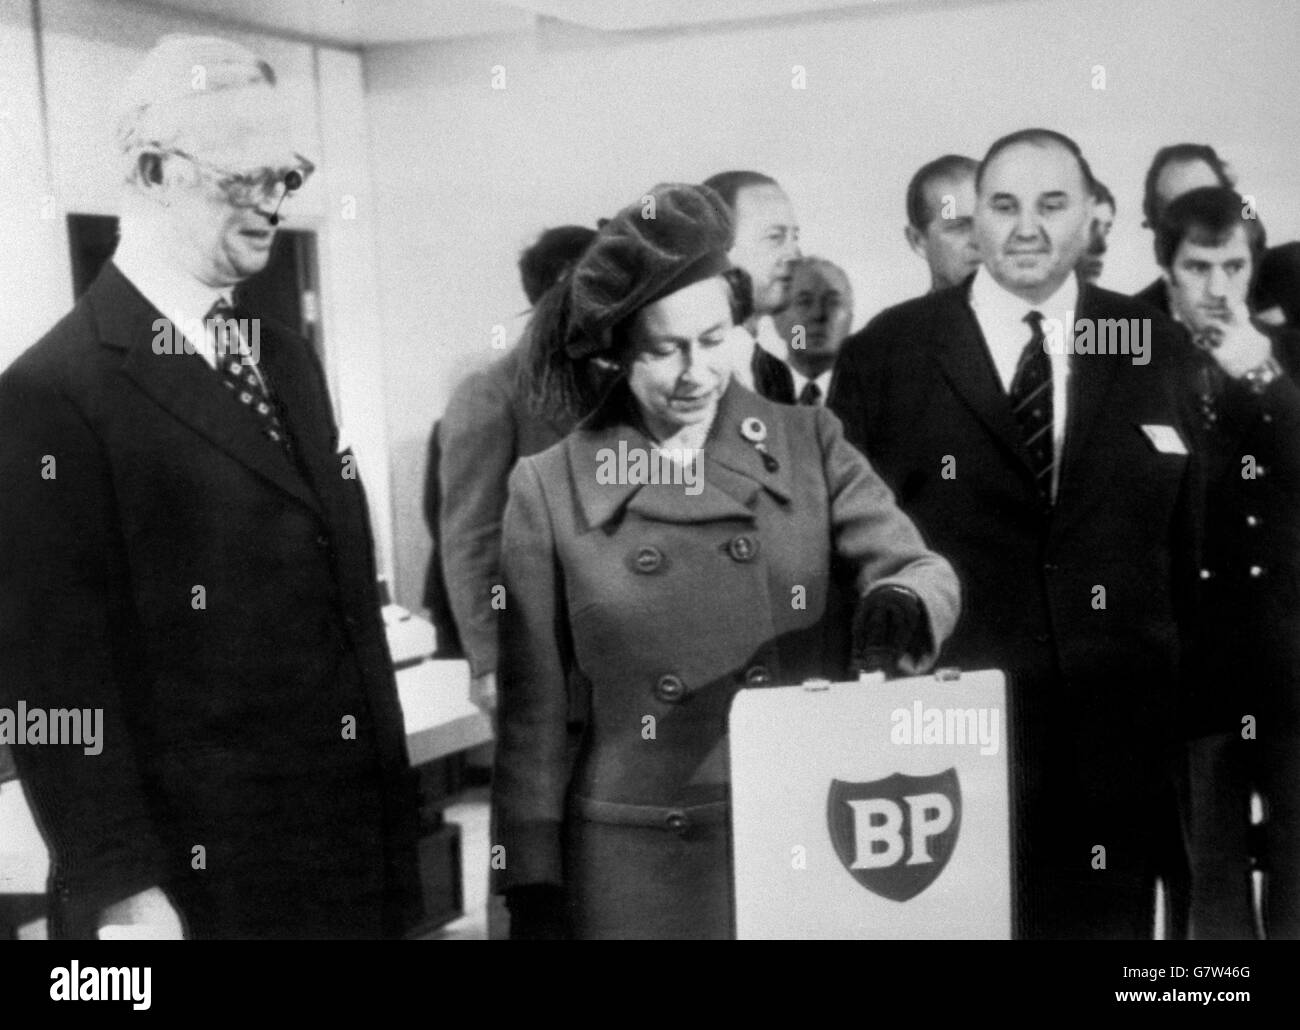 The Queen, flanked by Sir Eric Drake and Mr Colin Smith, presses a button in the control room at Dyce, near Aberdeen, to launch the flow of oil from the Forties Field in the North Sea to BP's Grangemouth refinery 237 miles away. Stock Photo